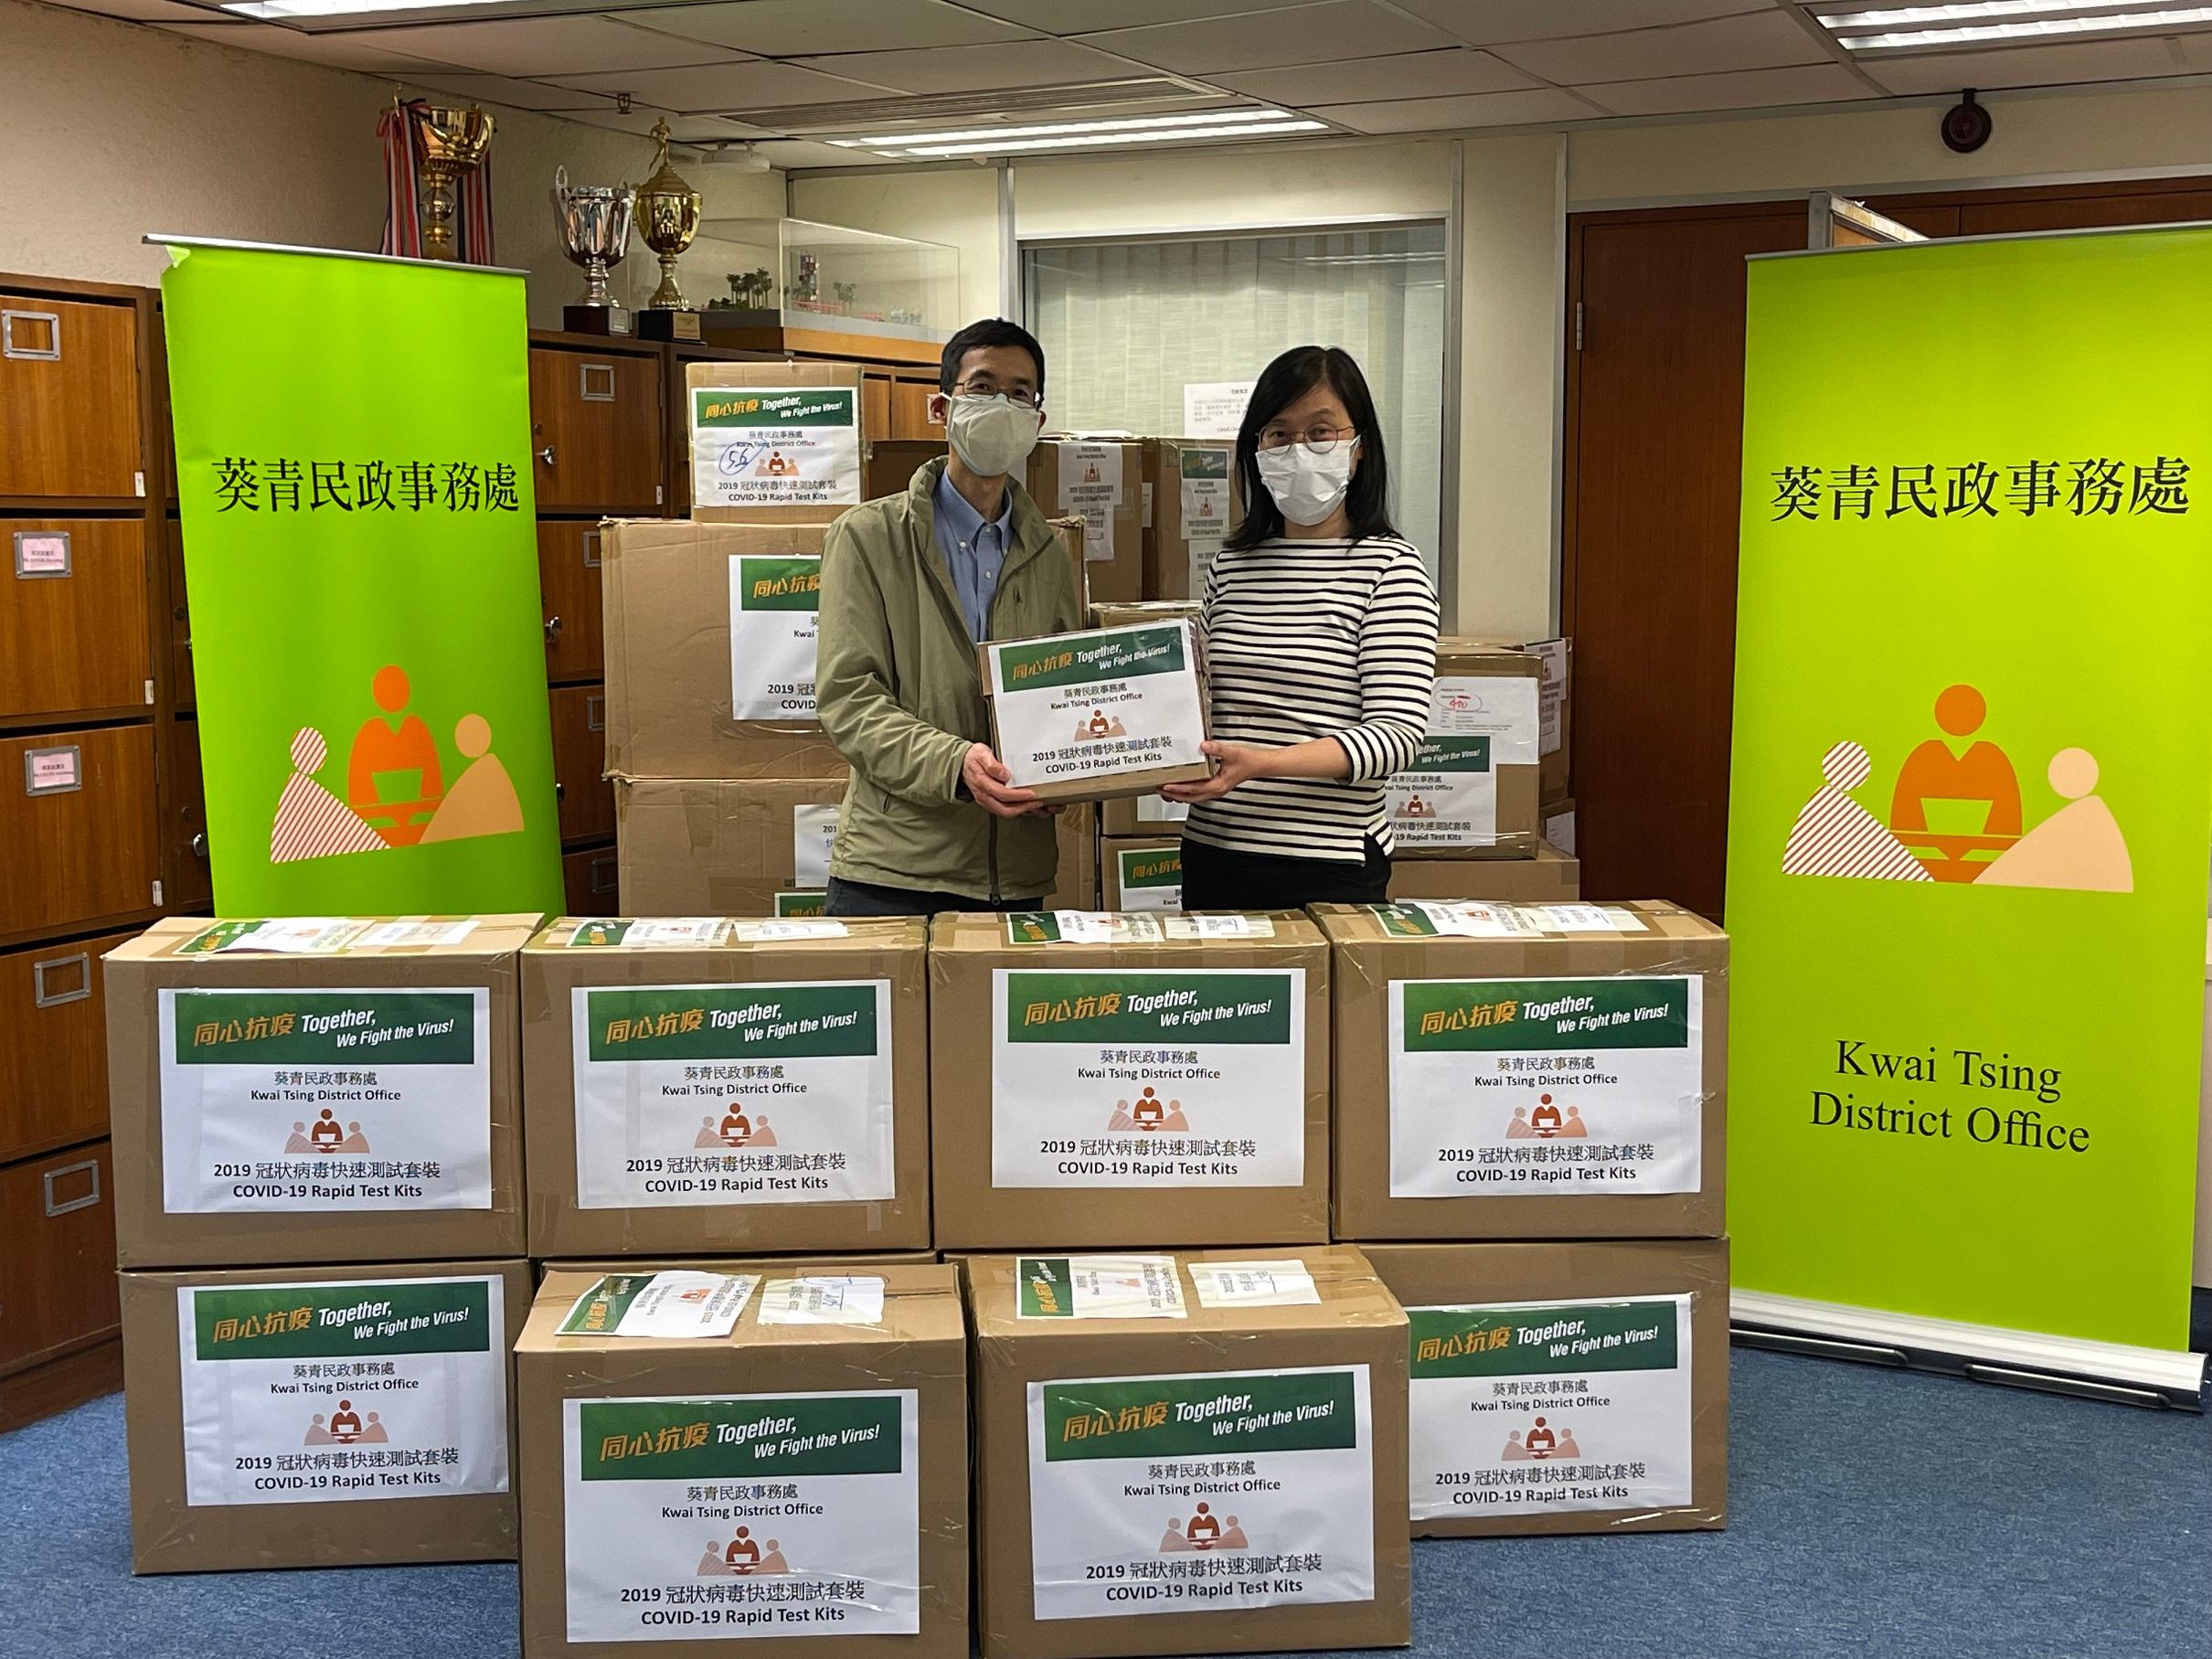 The Kwai Tsing District Office today (March 1) distributed COVID-19 rapid test kits to households, cleansing workers and property management staff living and working in Lai King Estate for voluntary testing through the Housing Department and the property management company.